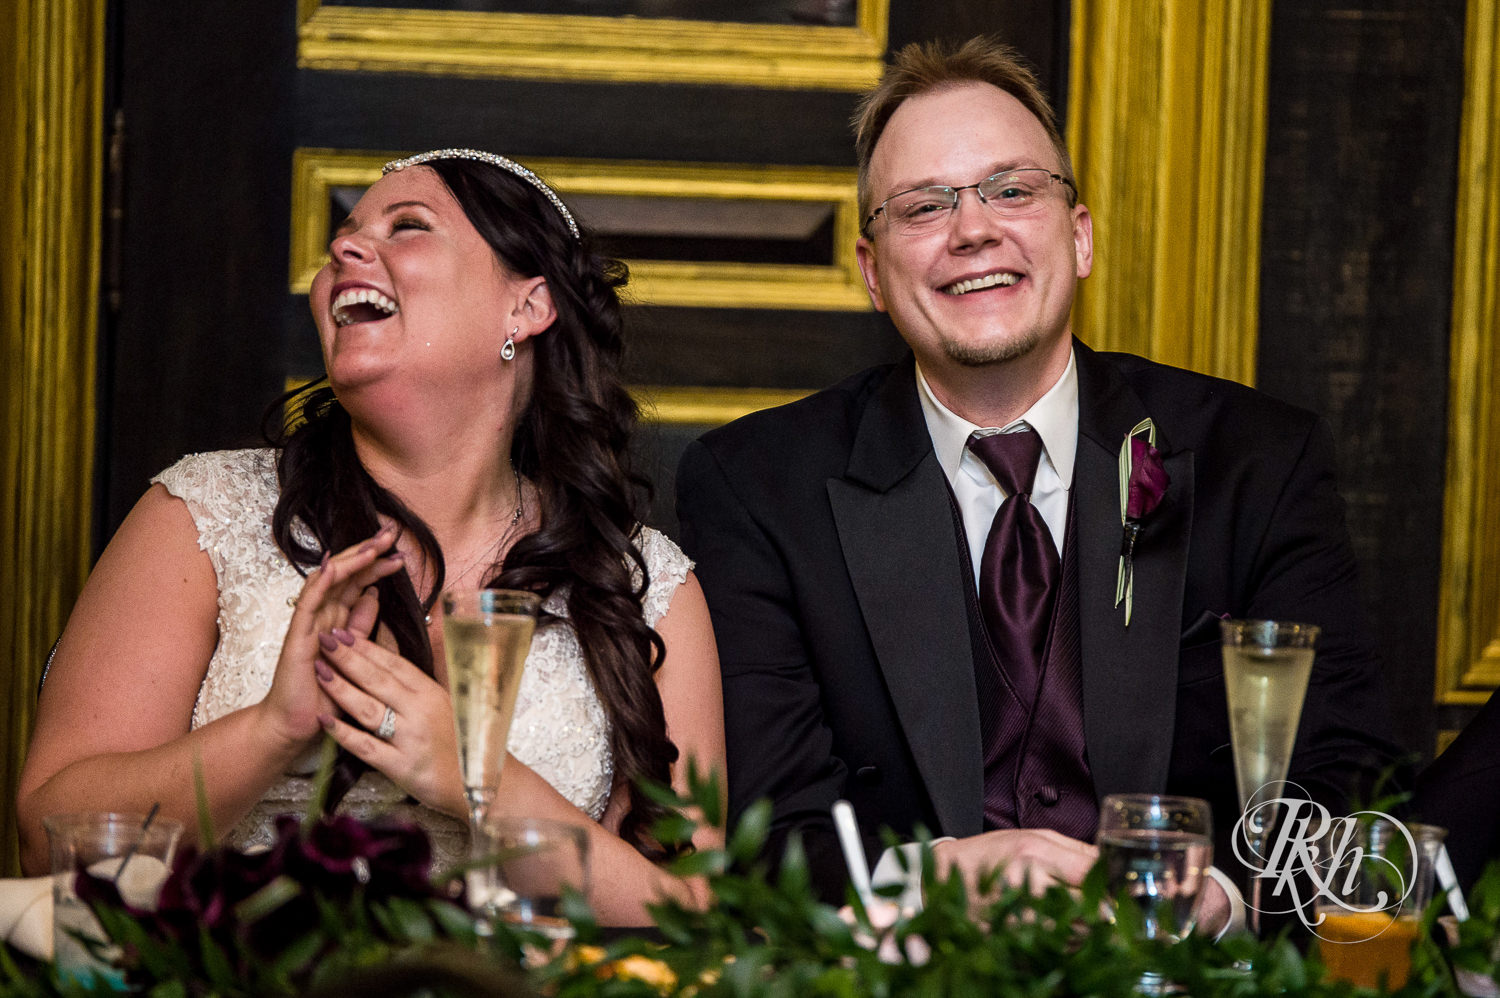 Bride and groom laugh during indoor wedding reception at Kellerman's Event Center in White Bear Lake, Minnesota.